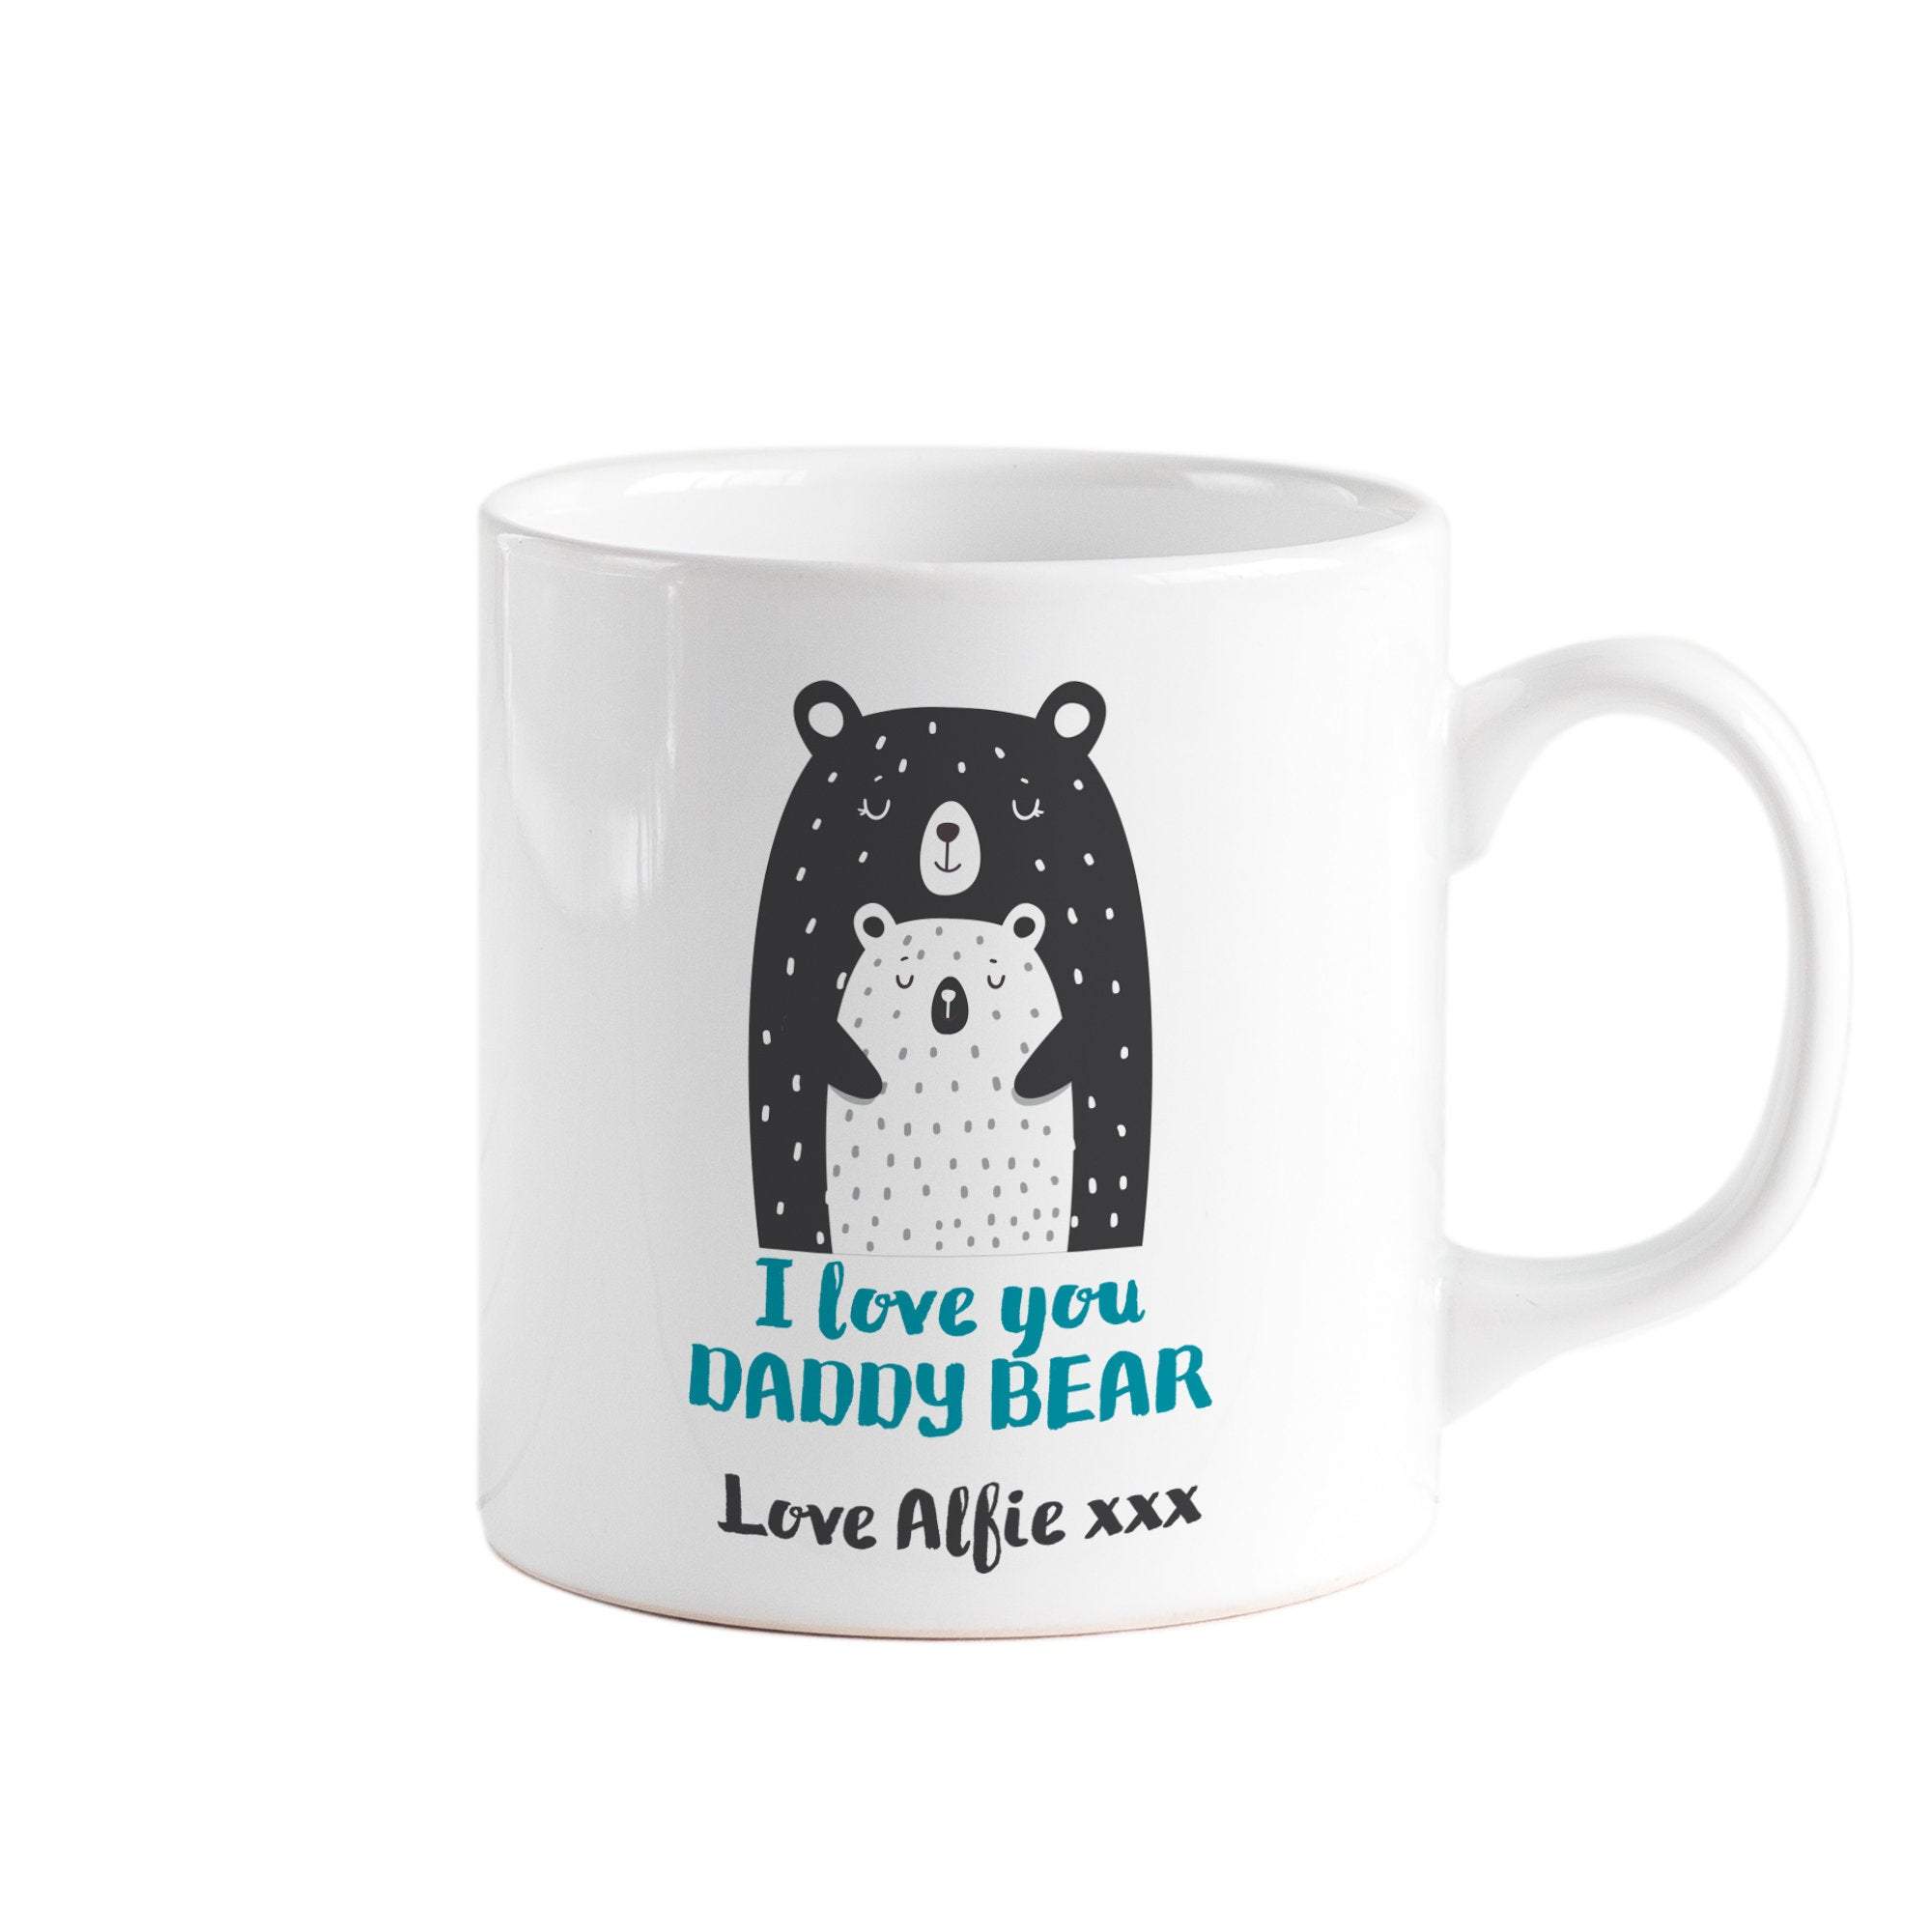 Personalised daddy bear mug, Gift for dad, Father's day present